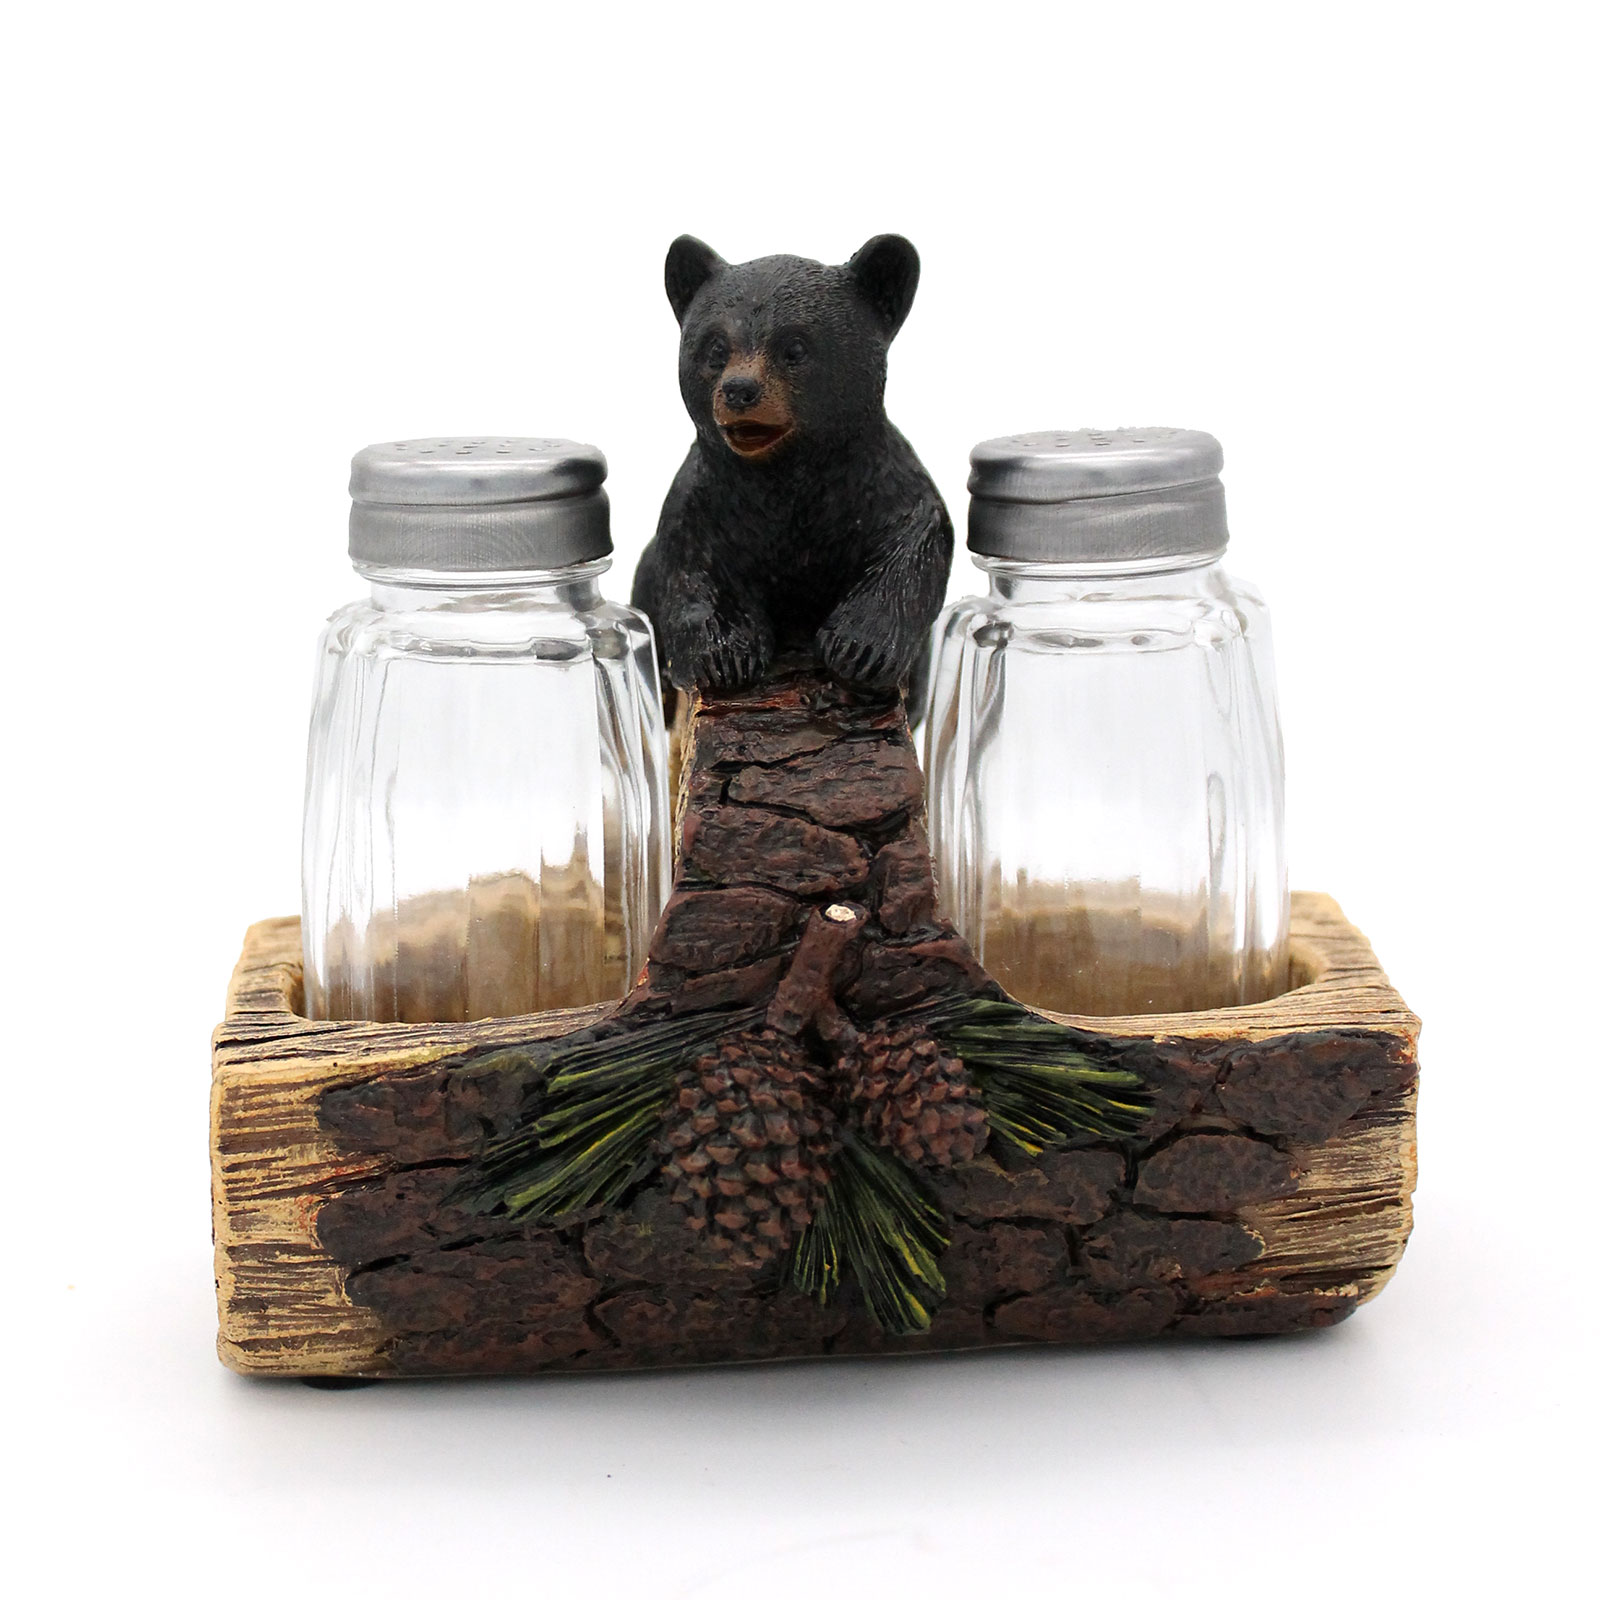 Black Bear Salt and Pepper Shakers - Blackbear in a Log Spices and  Seasonings Set - Glass Salt and Pepper Shakers Home Decor Salt and Pepper  Table Set